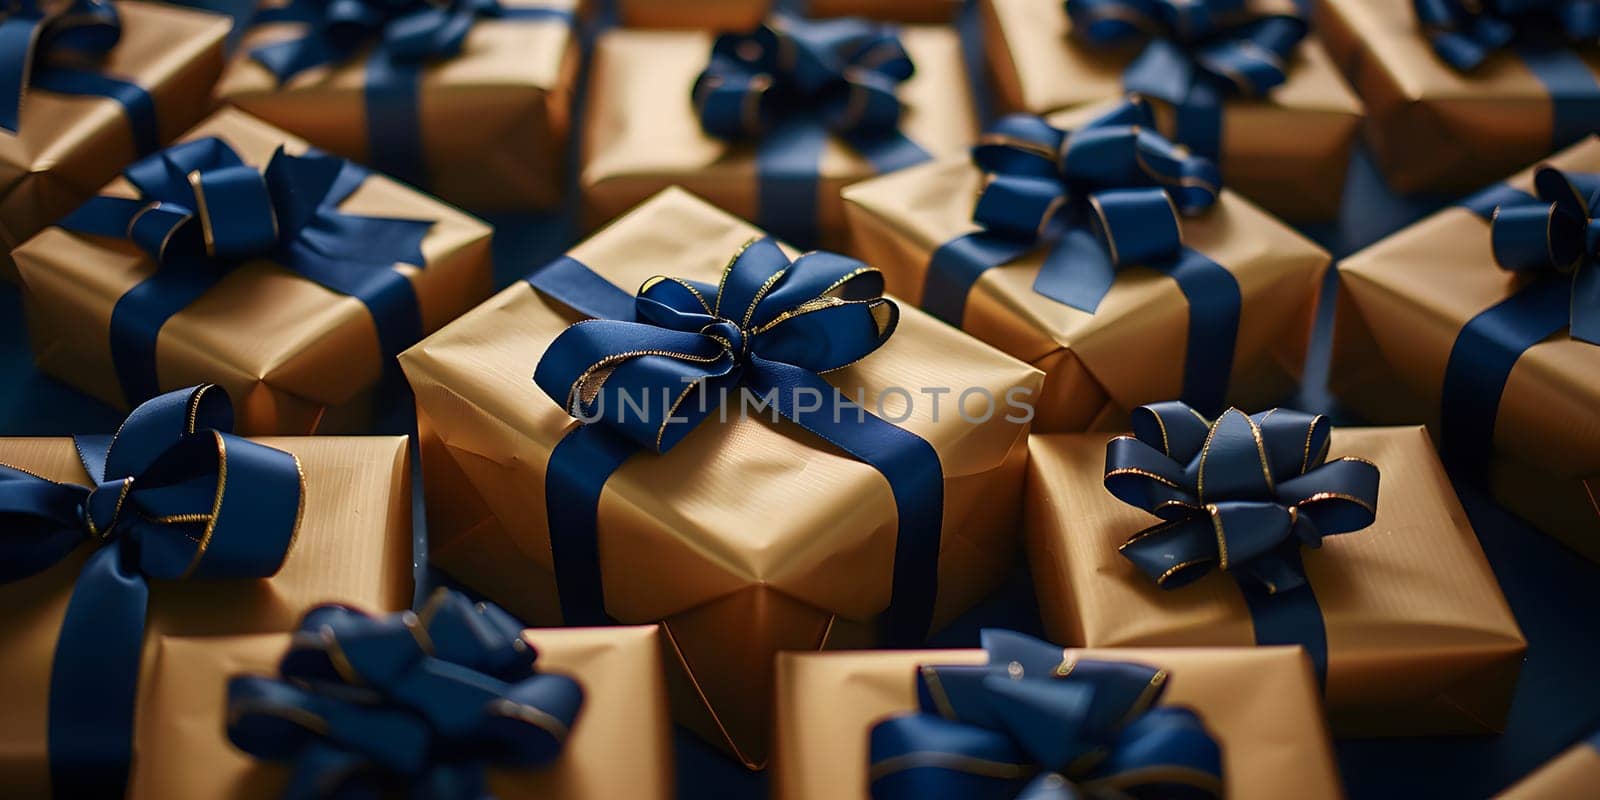 A collection of gifts wrapped in brown paper and adorned with electric blue bows, perfect for any event. Each package is a delightful combination of wood, rectangle shapes, and fashionable accessories